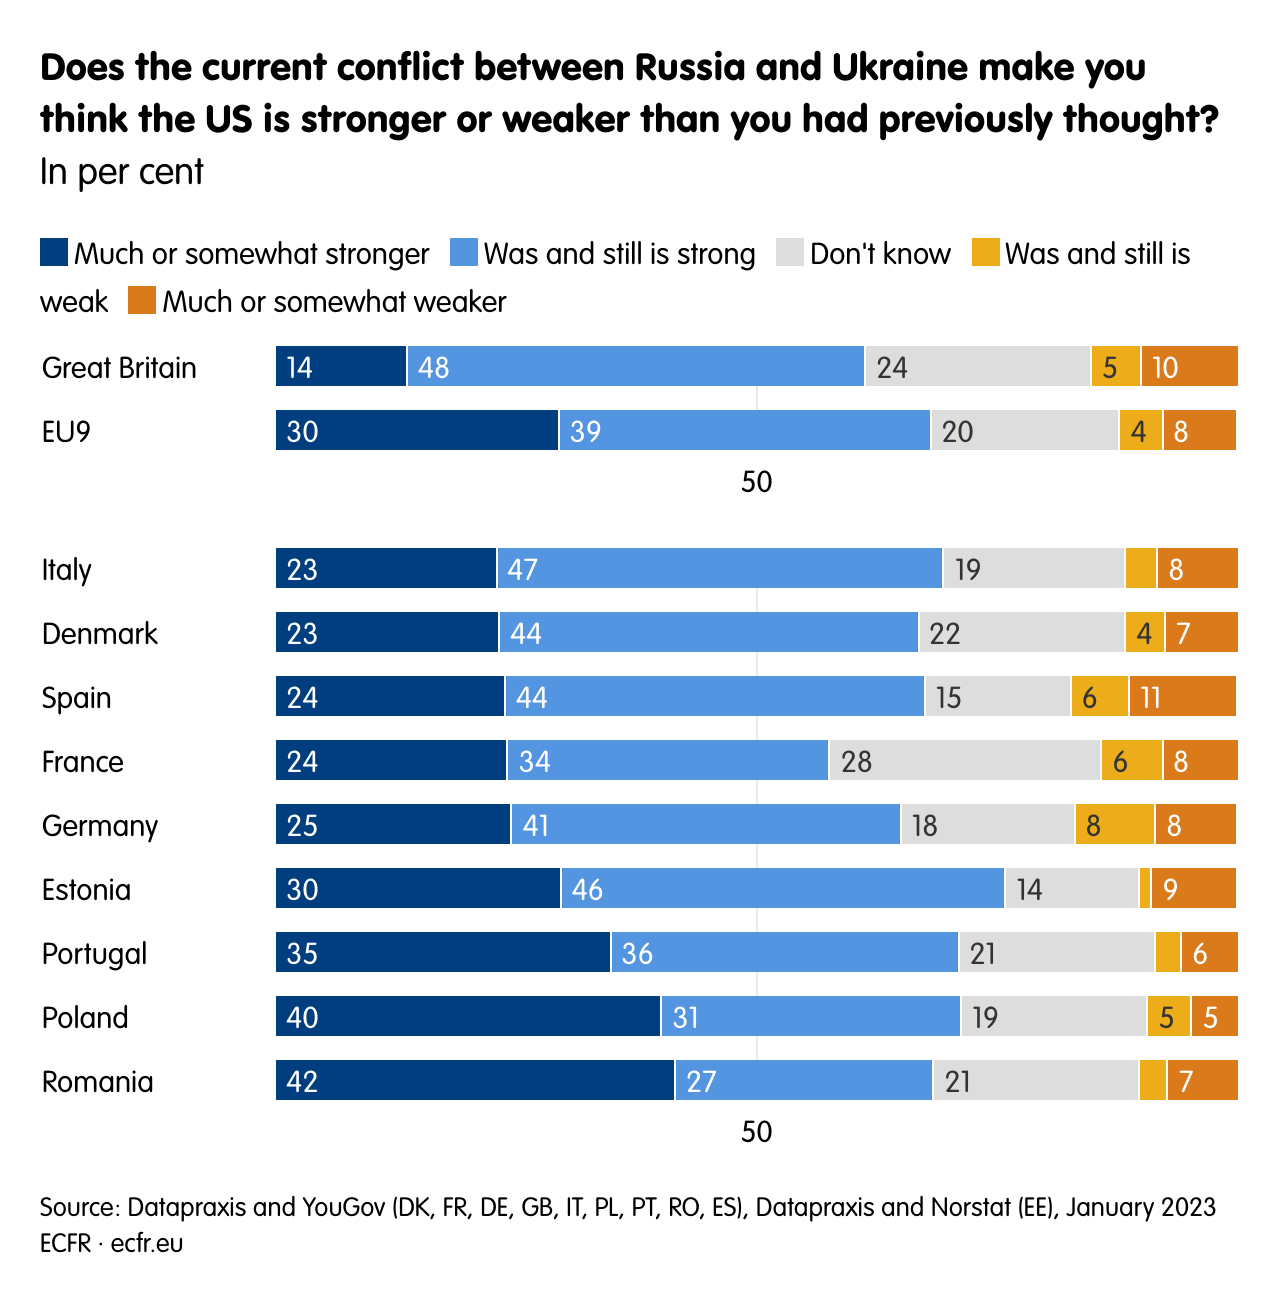 Does the current conflict between Russia and Ukraine make you think the US is stronger or weaker than you had previously thought?